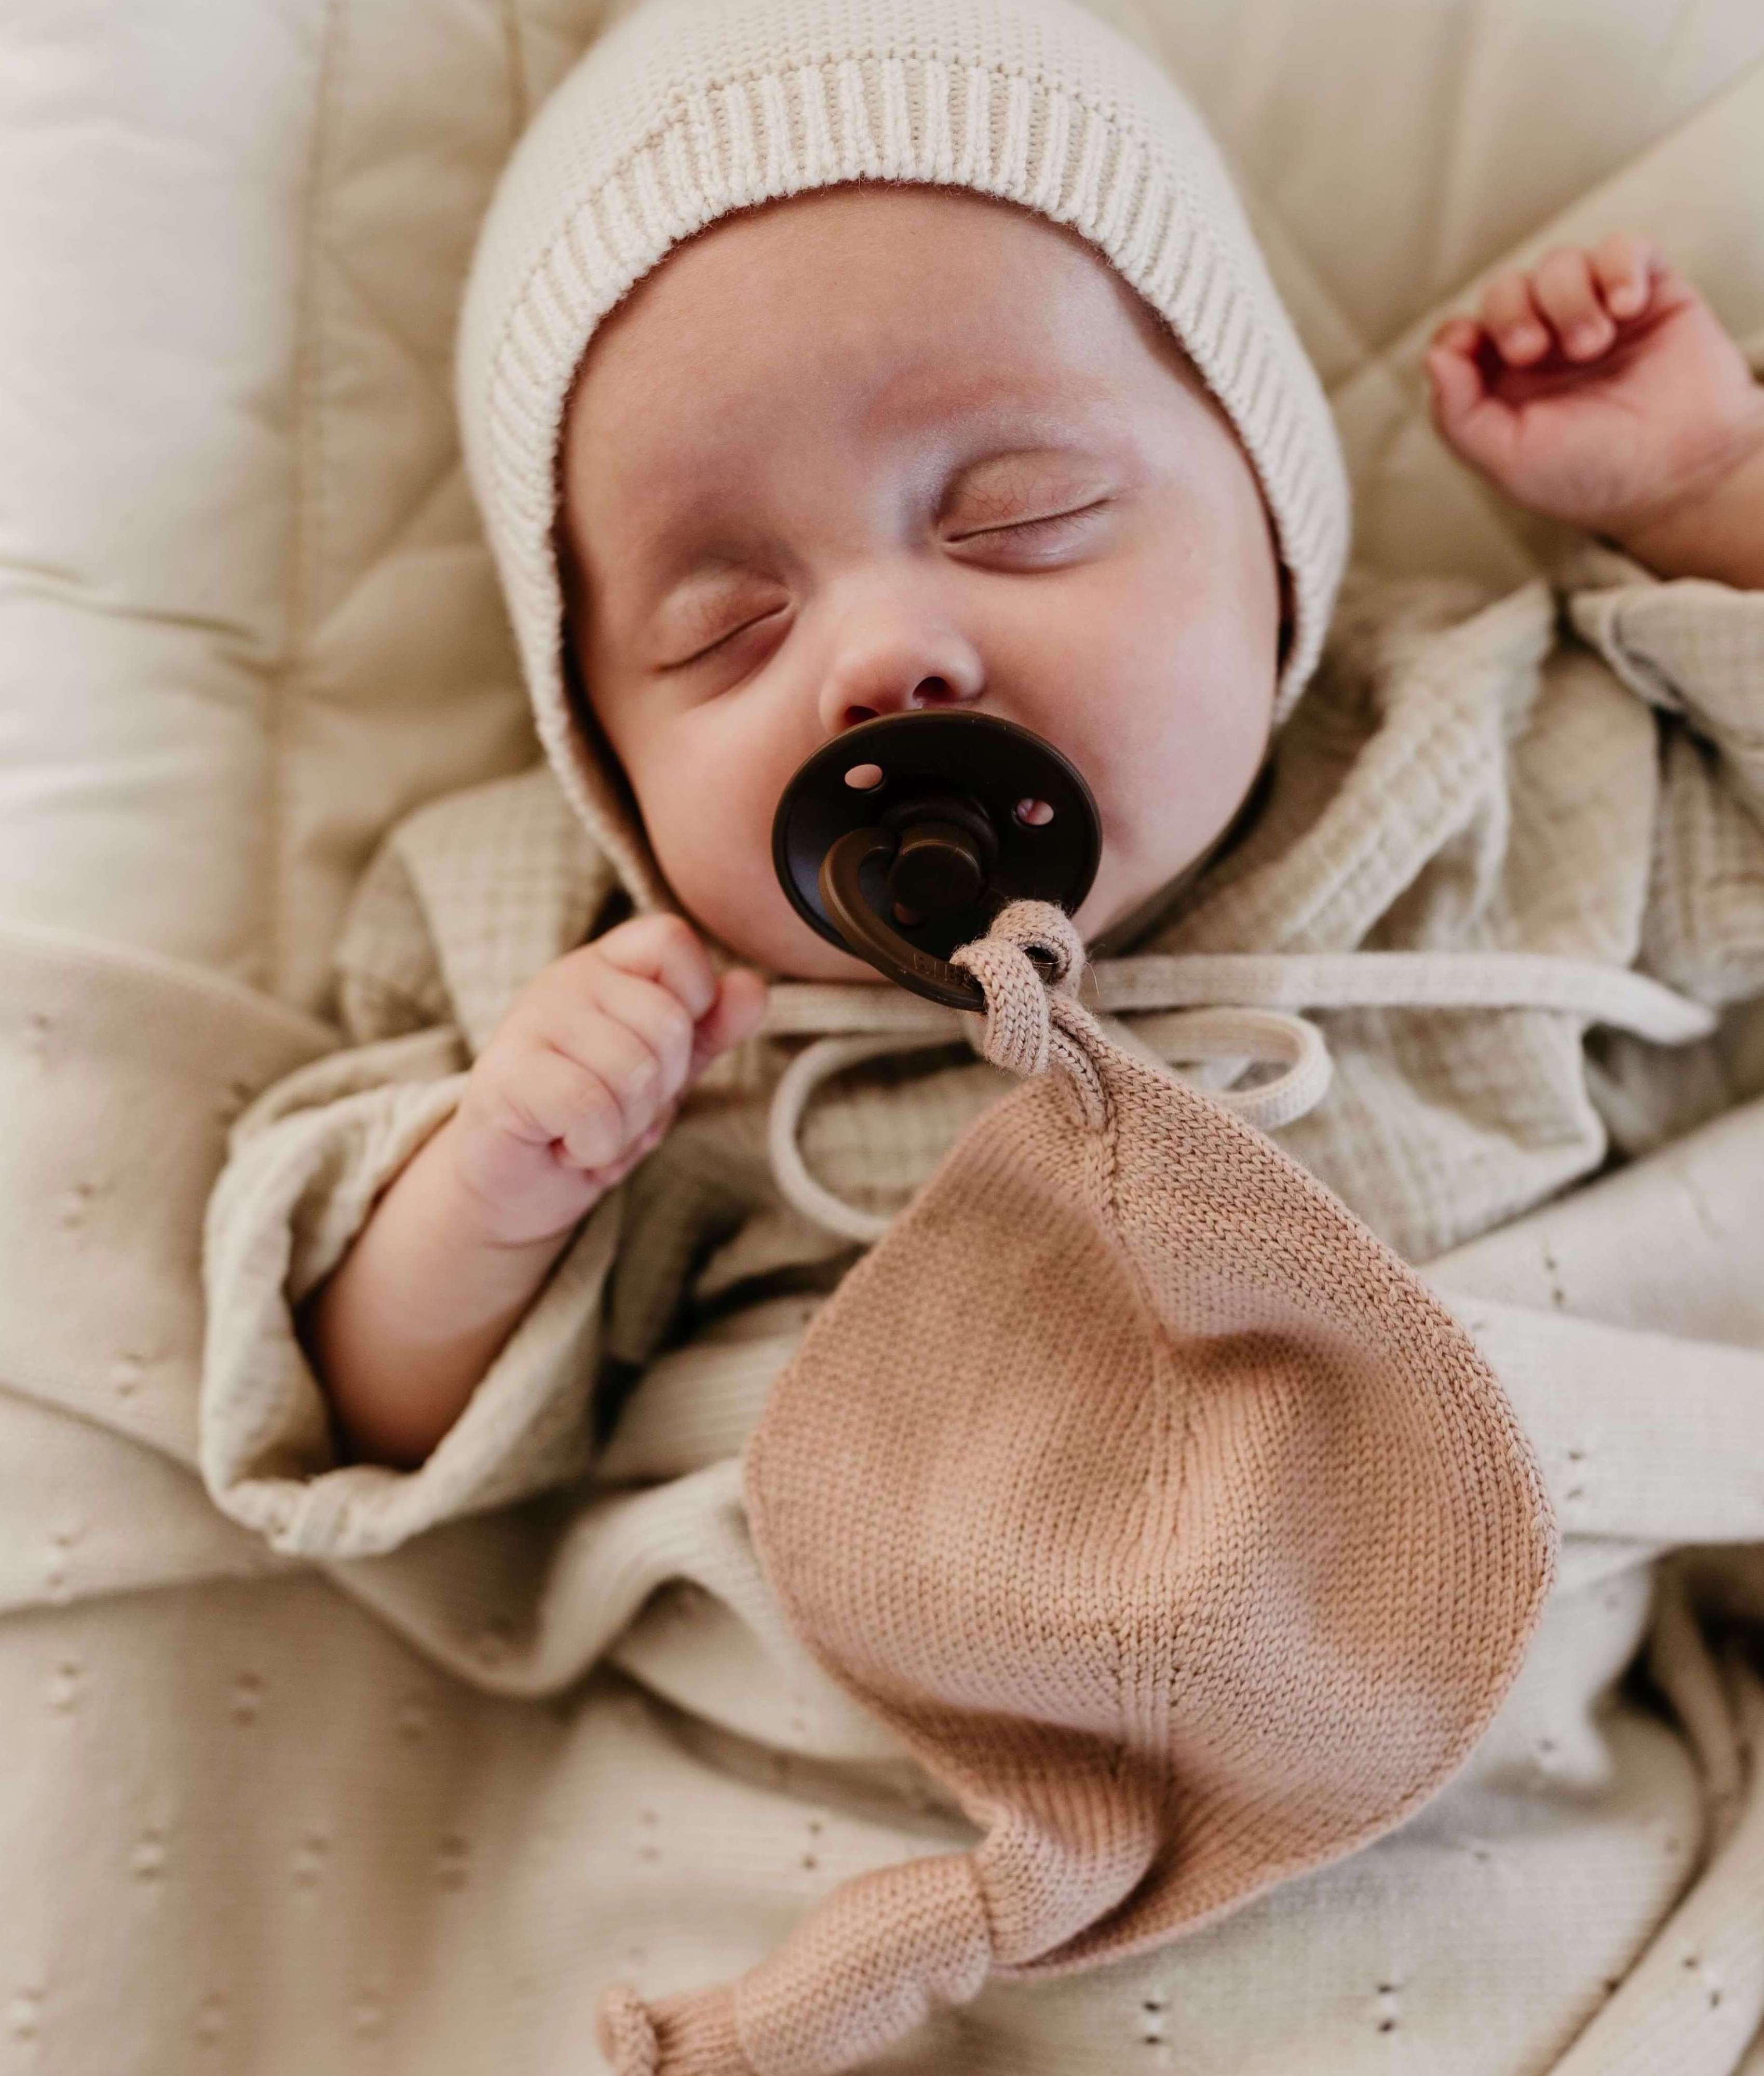 Baby in beige cotton clothes, wrapped in a blanket